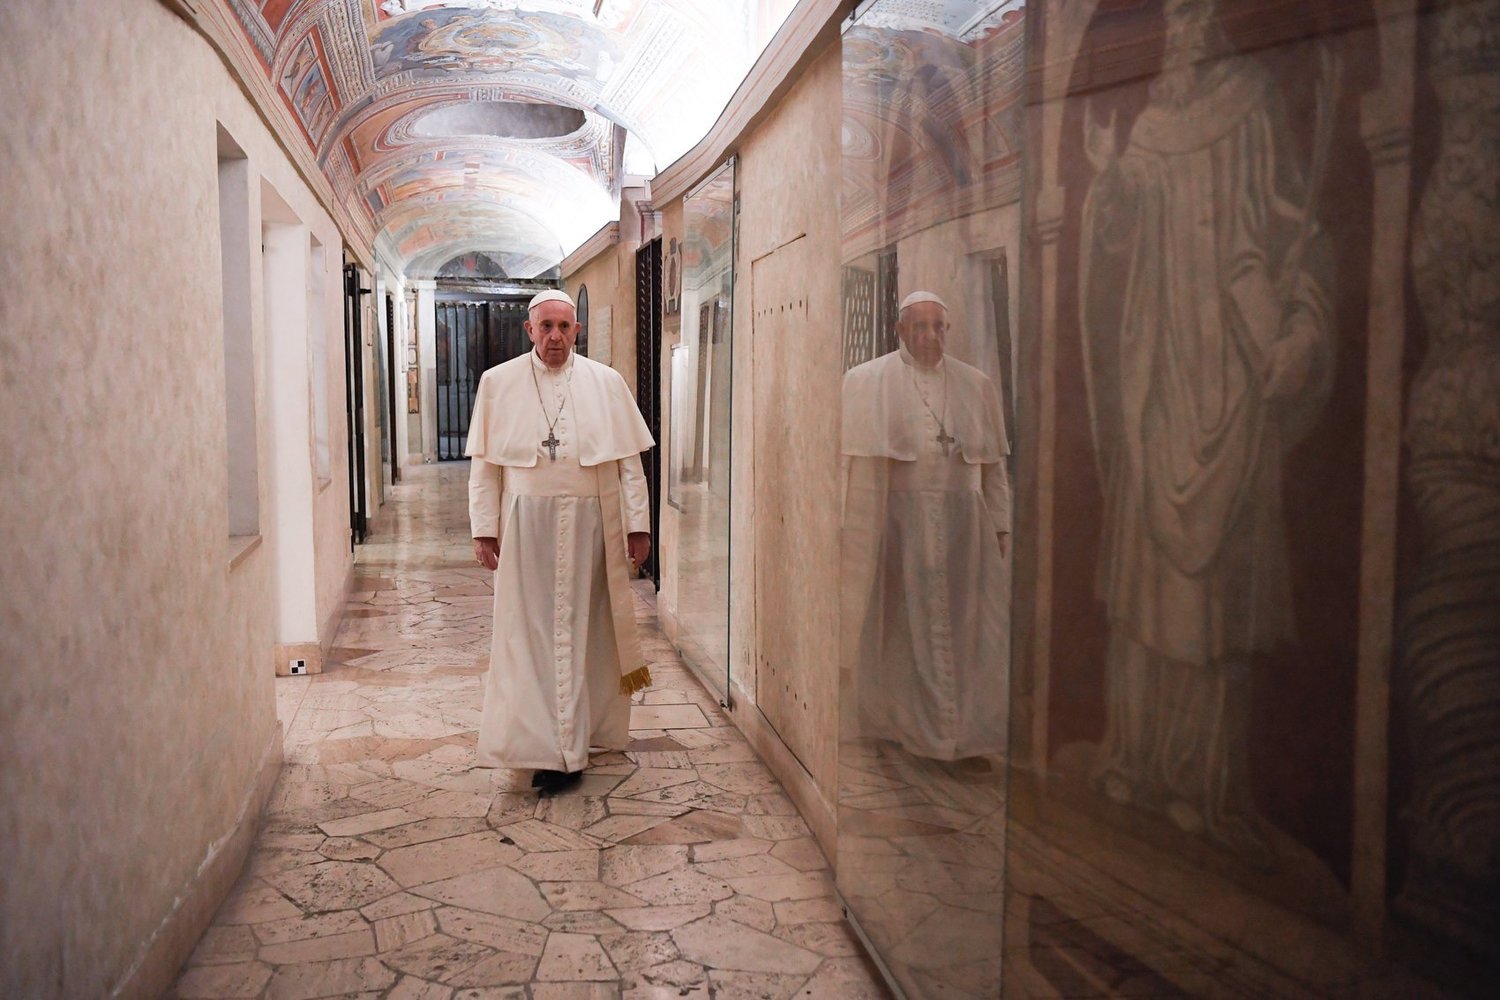 Pope Francis walks through the crypt of St. Peter's Basilica as he visits the tombs of deceased popes at the Vatican on All Souls' Day, Nov. 2, 2020. In a 2023 interview marking the 10th anniversary of his election, the 86-year-old pope said he thinks about death often, but it is a good think to remember one will not live forever. (CNS photo/Vatican Media)